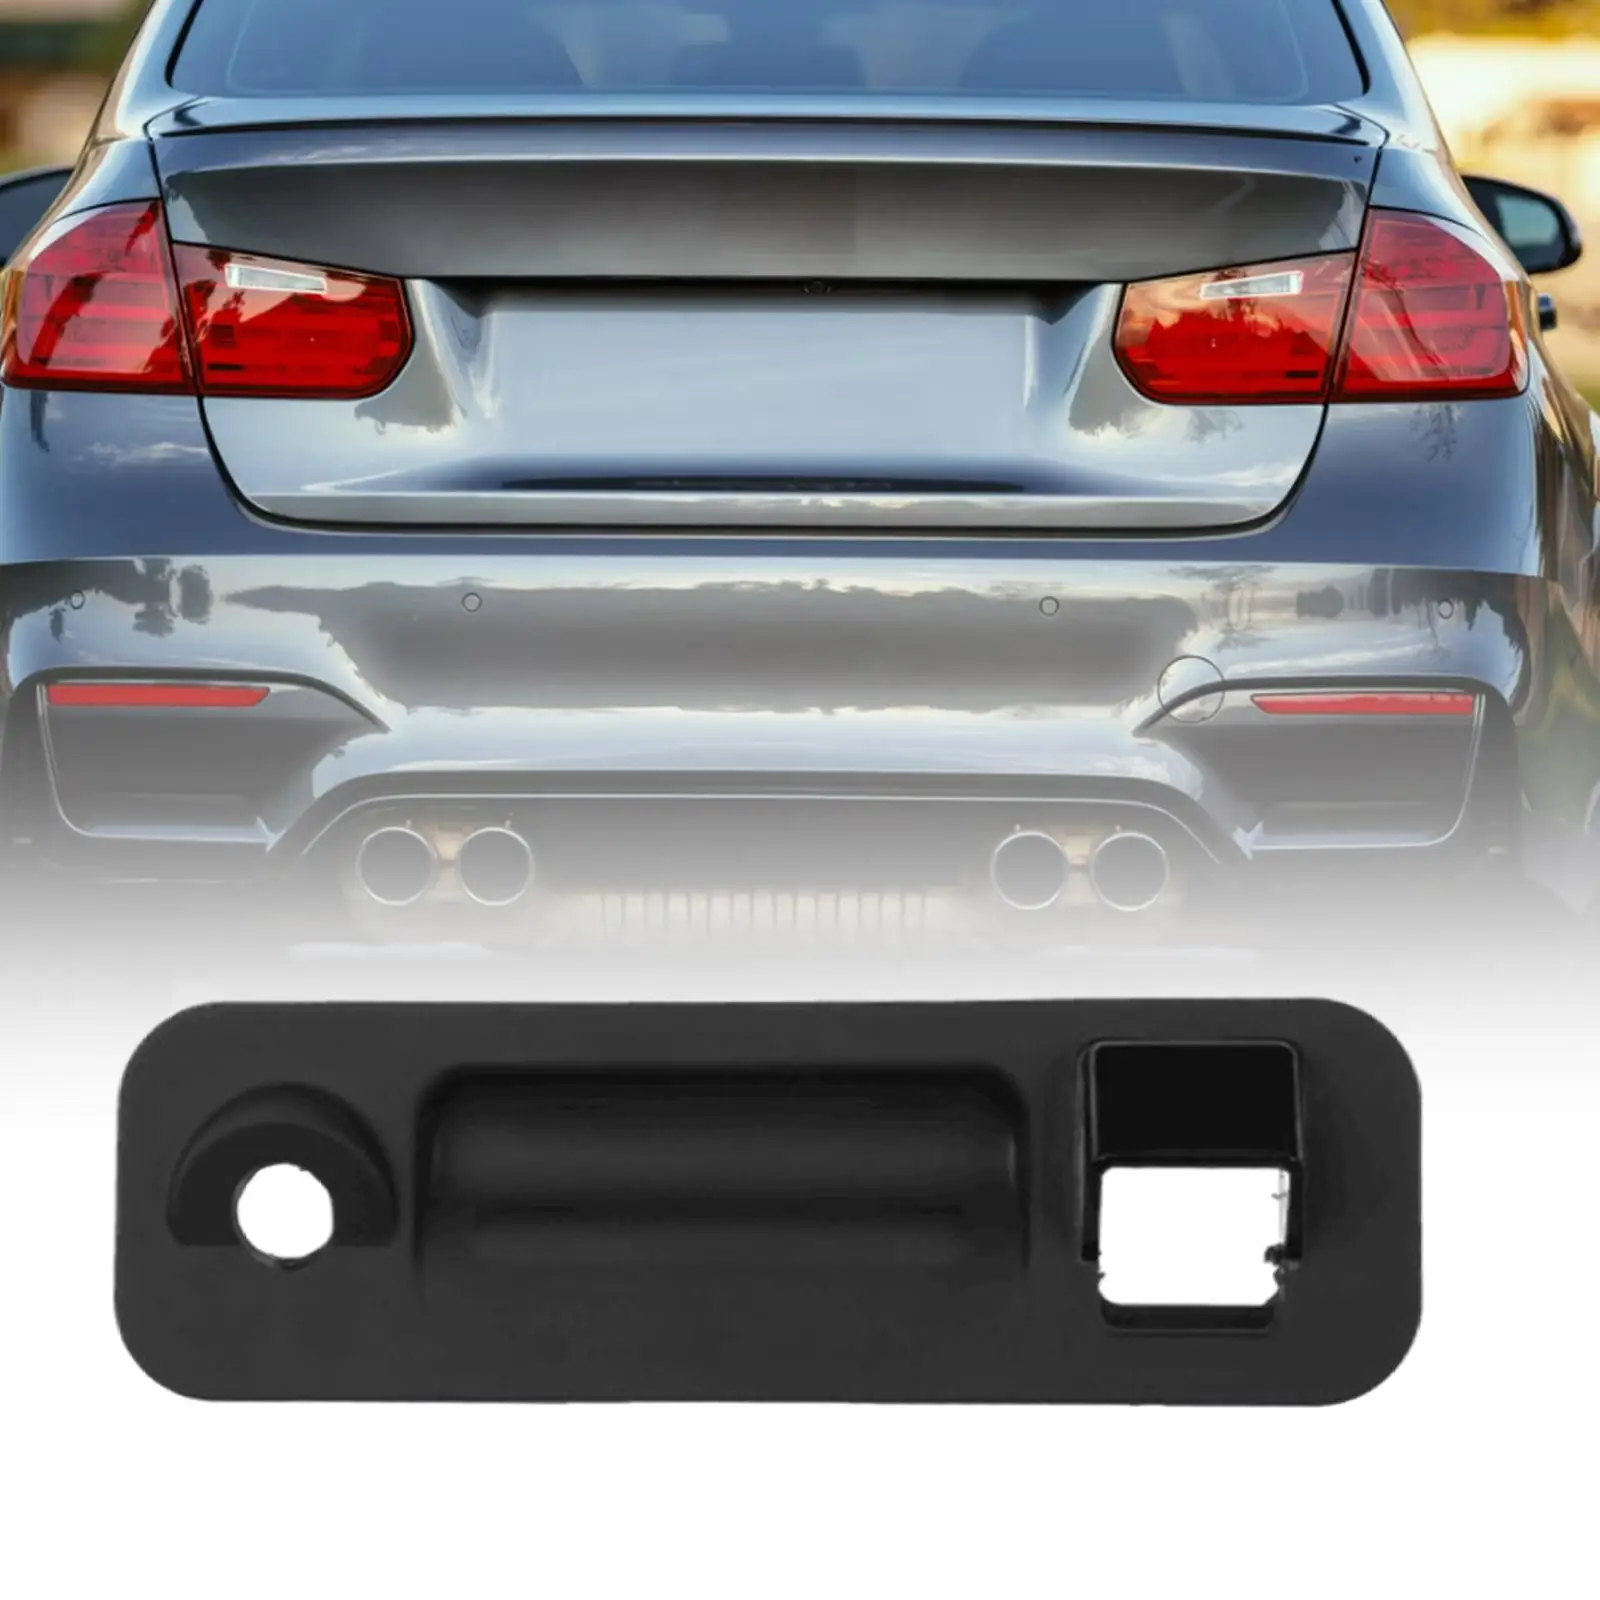 Outside Trunk Lid Lock Handle Plastic Fit for Hyundai Sonata 15-17 ACC Replace Parts